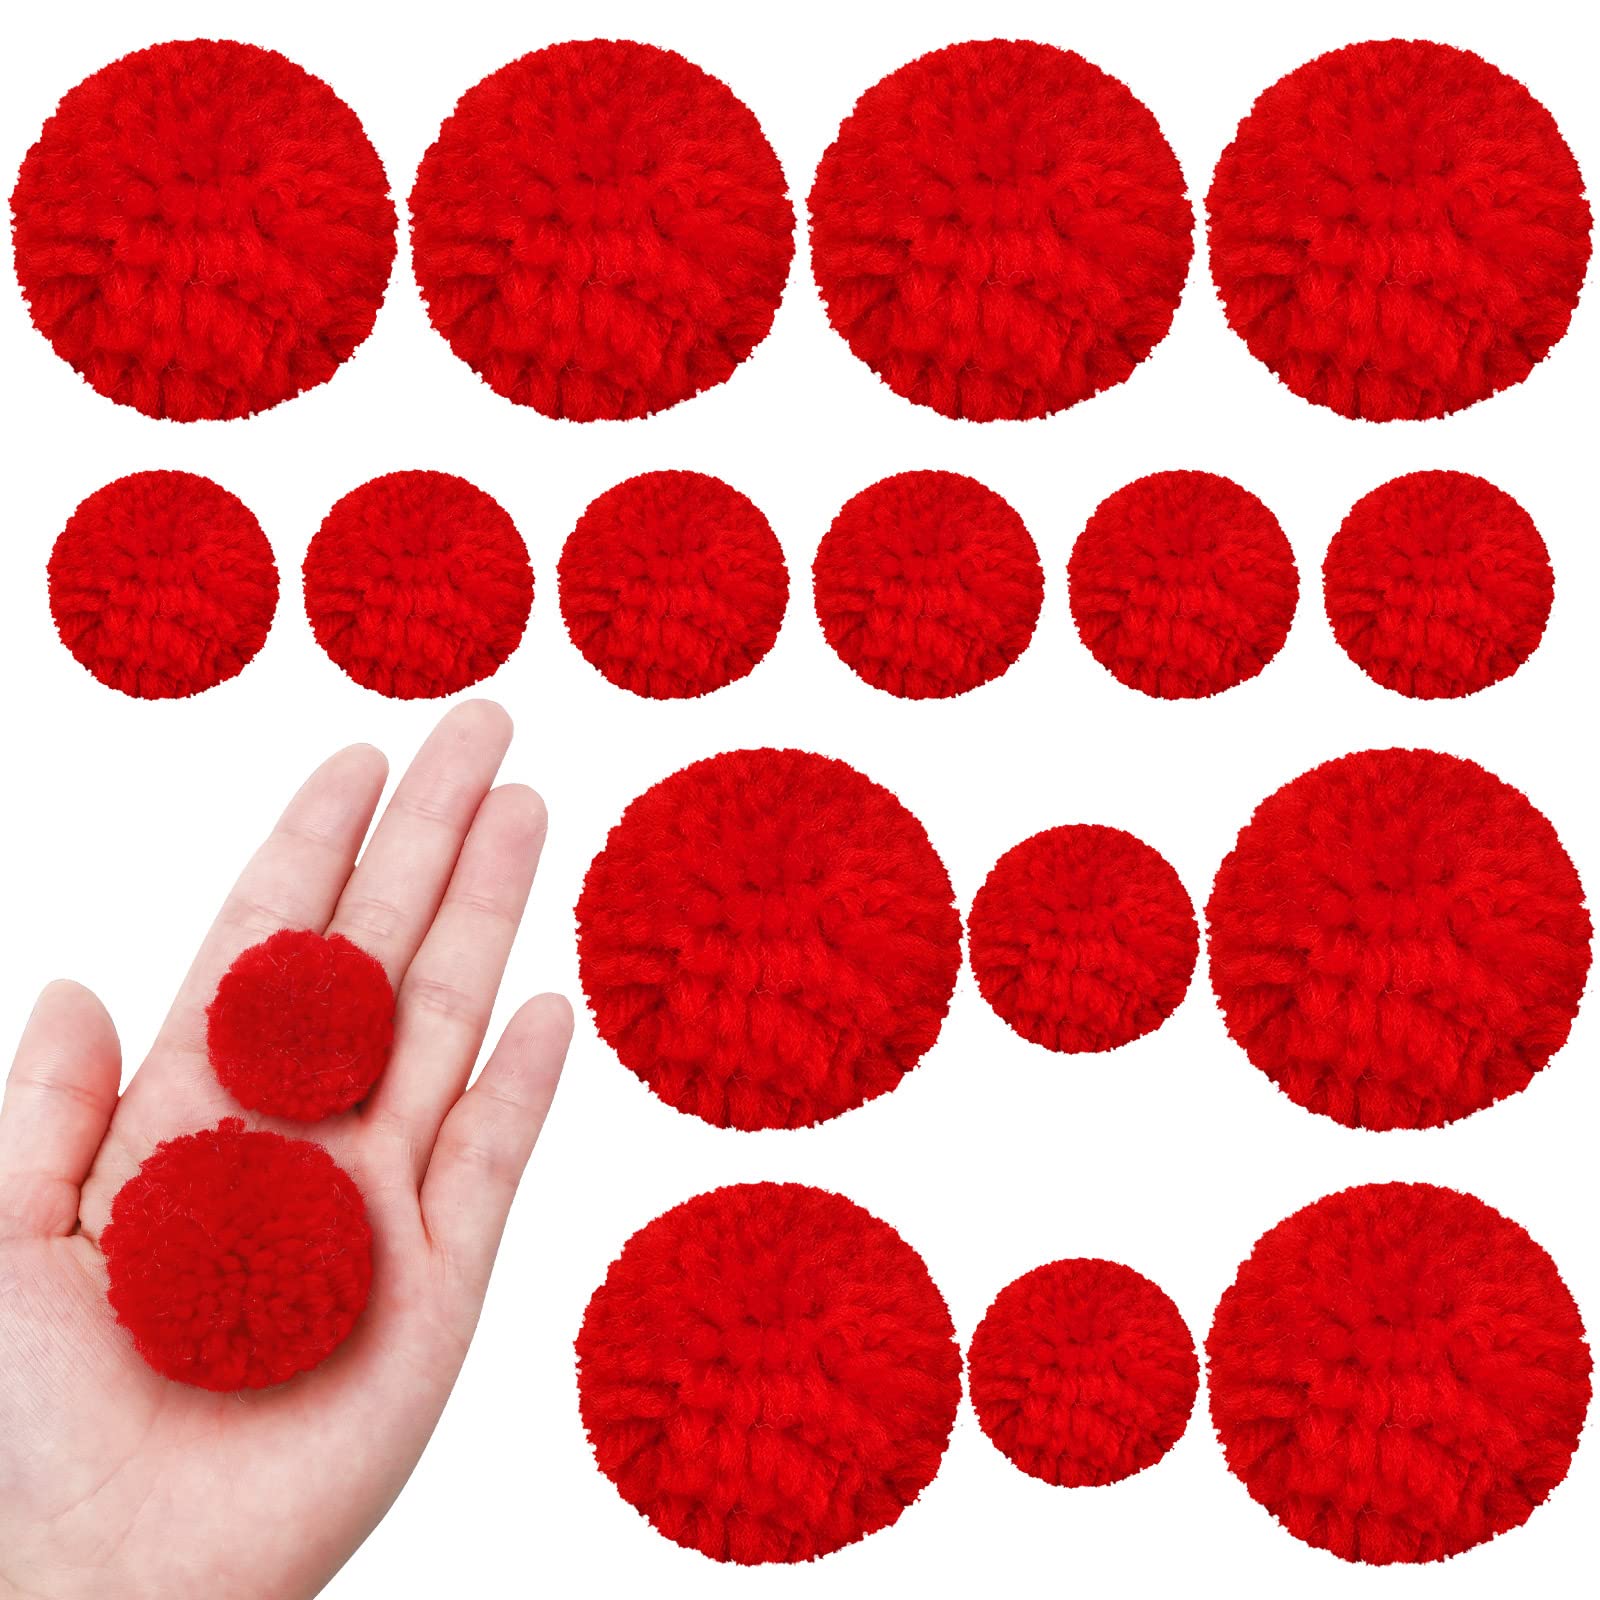 Syhood 30 Pcs Yarn Pom Poms Set Includes 20 Pcs 1 Inch Pompoms 10 Pcs 1.5  Inches Pompom Balls for Christmas Crafts White Red Fluffy Pompom Balls for  Xmas Party Decor Costume DIY Supplies (Red)